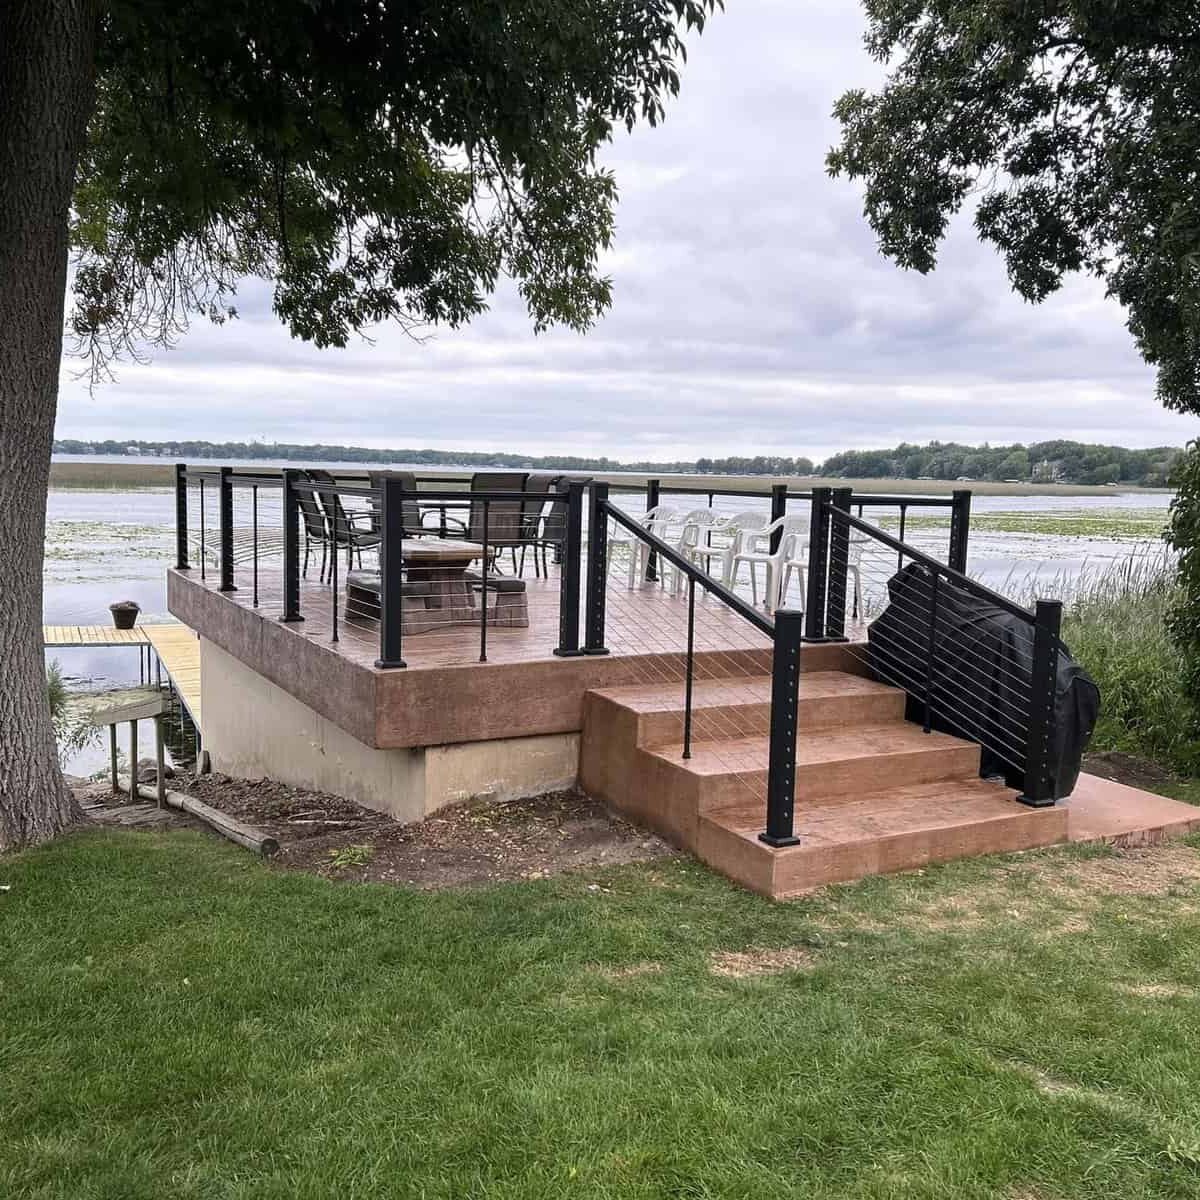 An outdoor patio with furniture overlooking a calm body of water, featuring steps leading down to a grassy area and a picturesque view of the treeline in the distance.